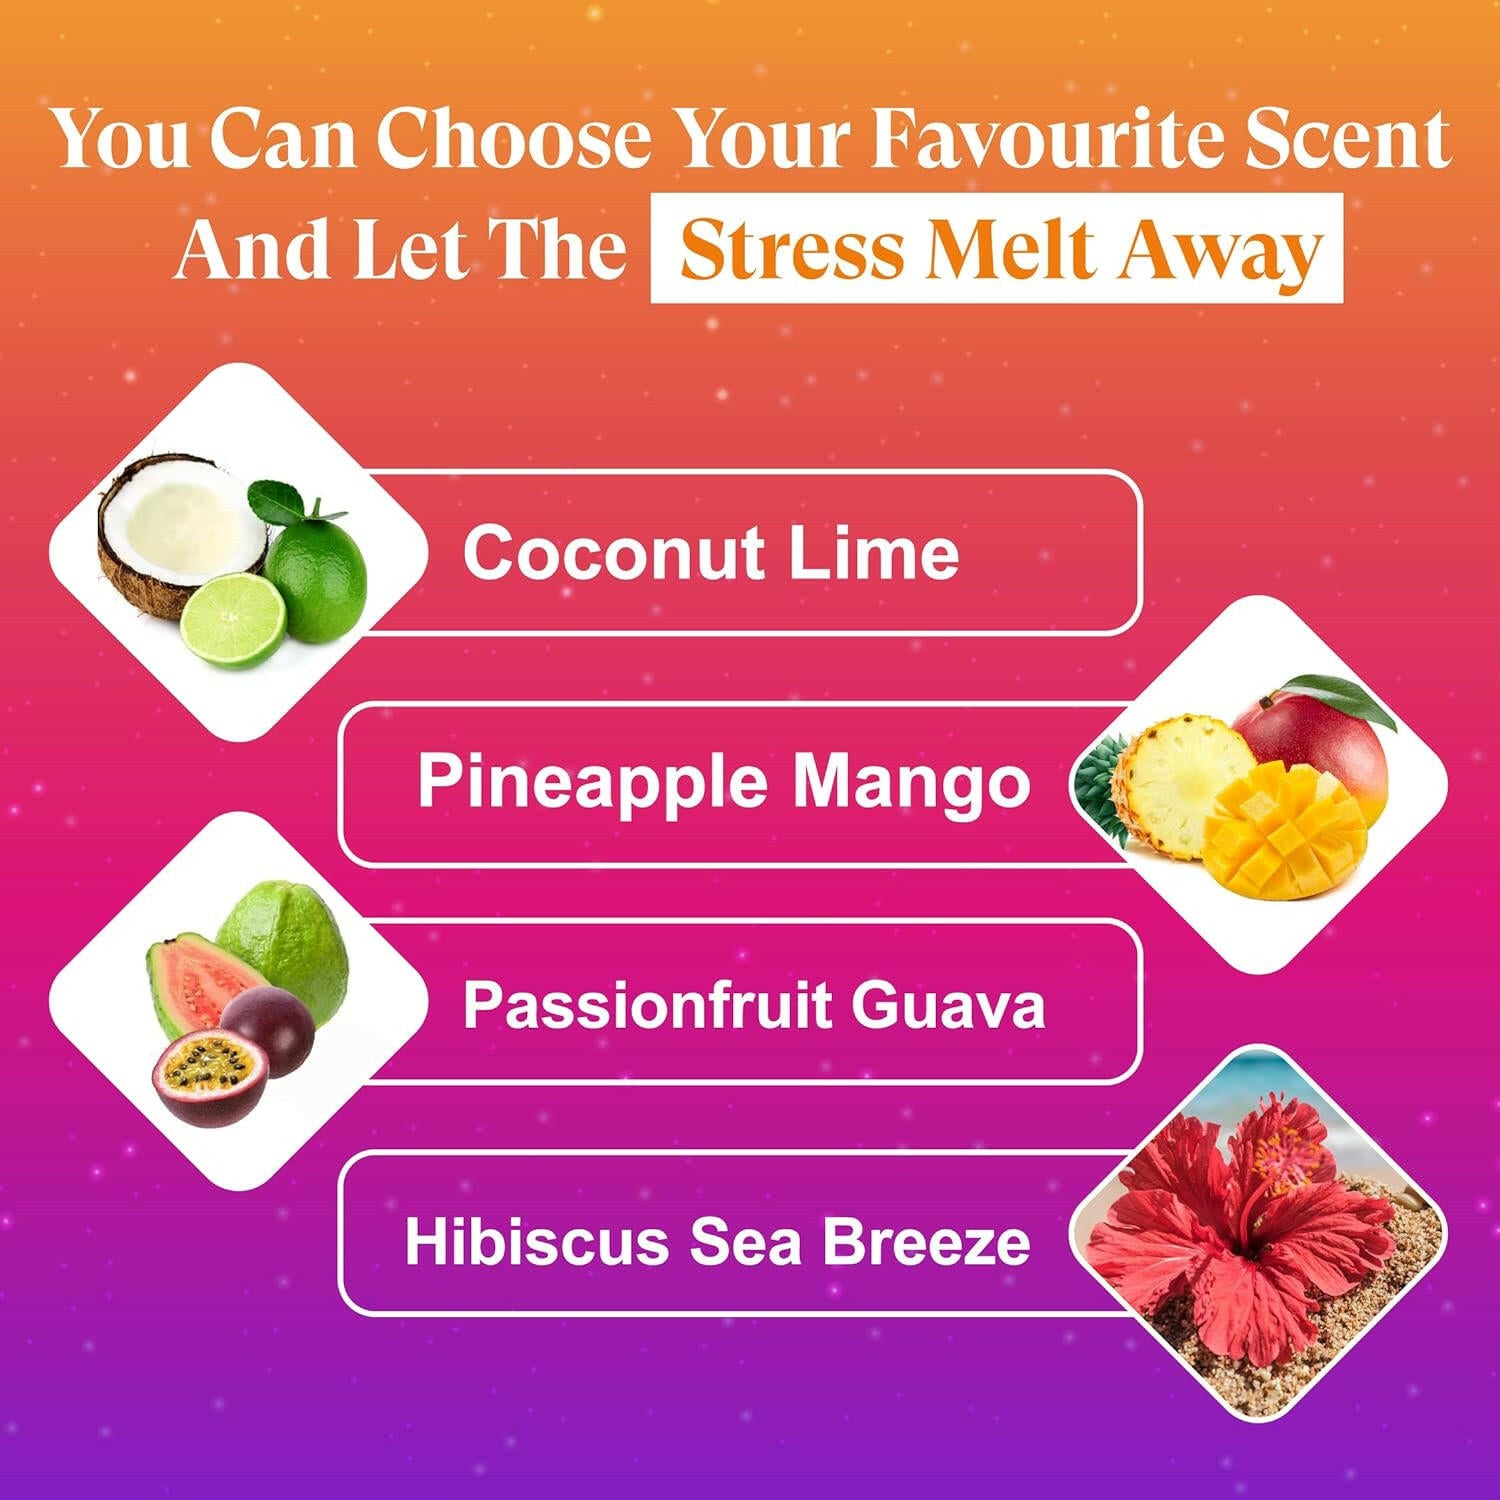 Choose Your Favourite Scent